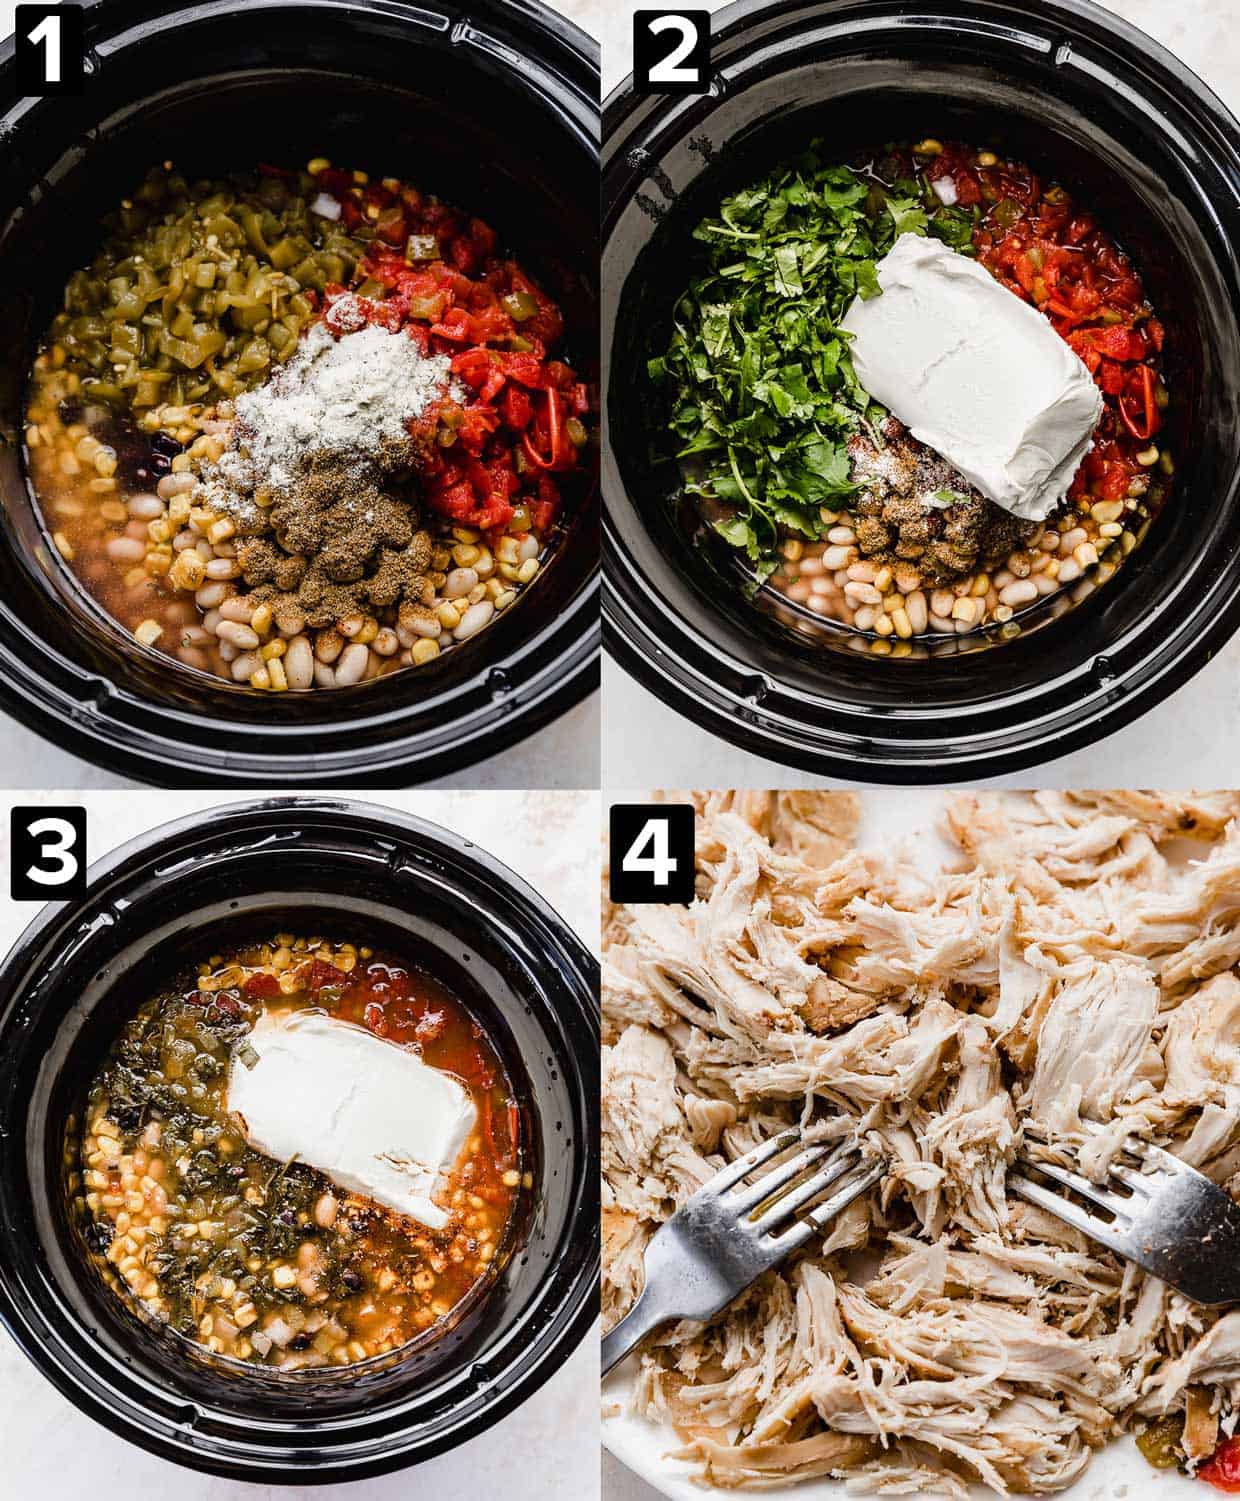 Four images showing a black slow cooker with Crock Pot Cream Cheese Chicken Chili ingredients inside, the bottom right photo is two forks shredding chicken.